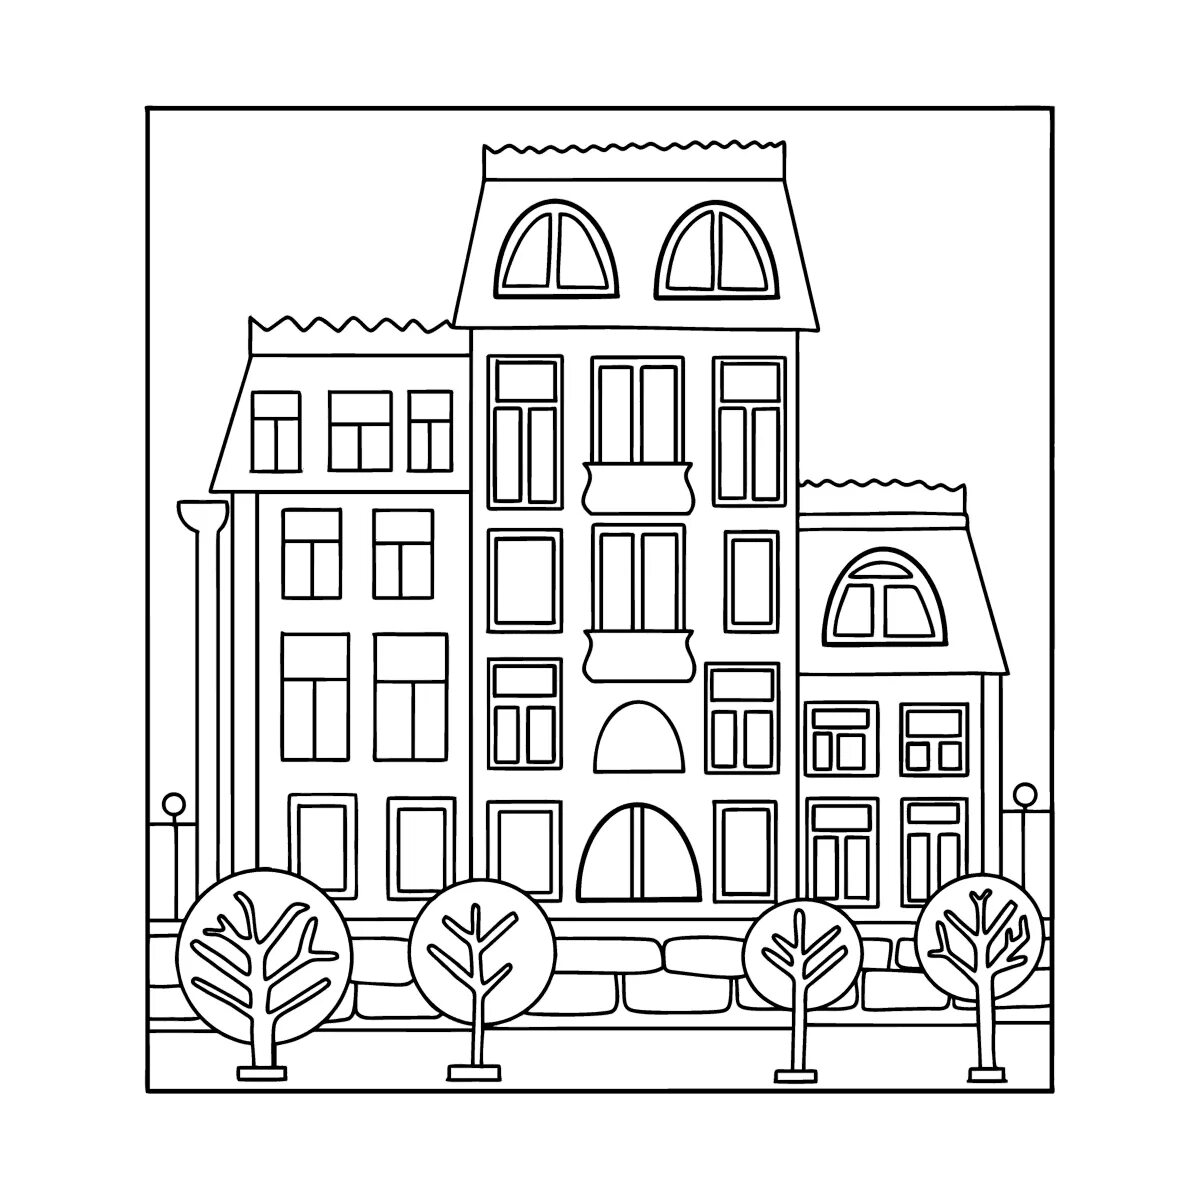 Amazing high-rise coloring pages for kids